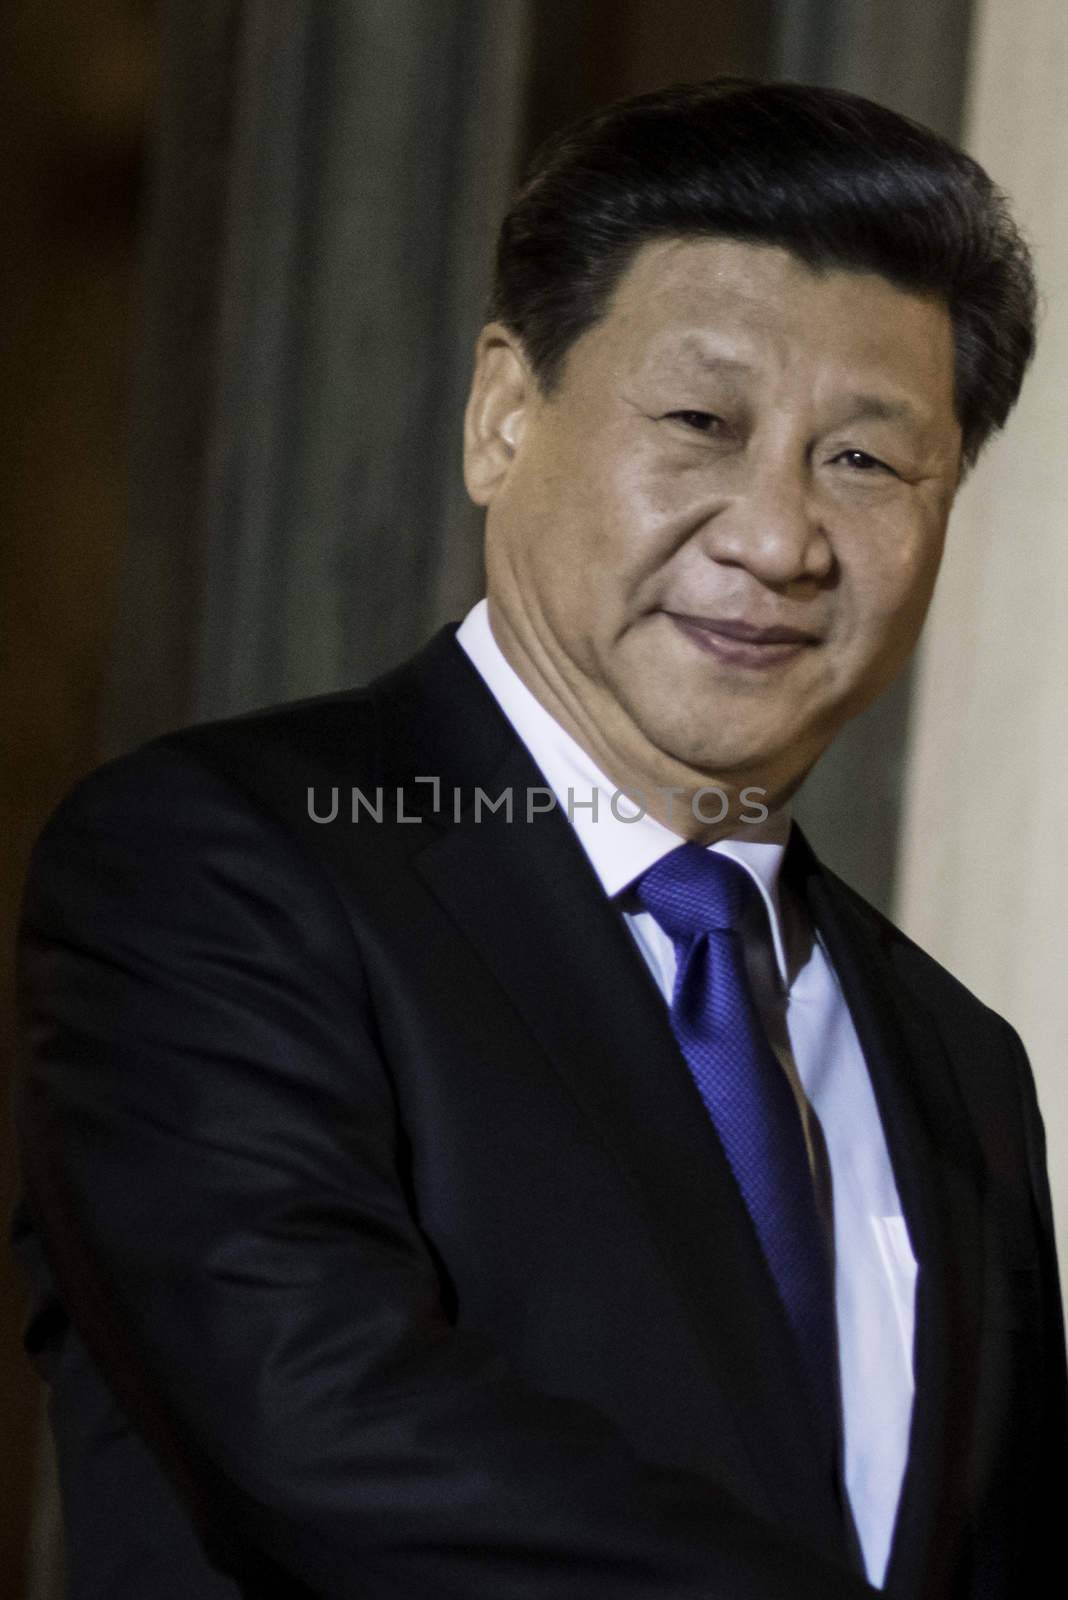 FRANCE, Paris : China's President Xi Jinping stands at the Elysee palace in Paris on November 29, 2015 before a dinner meeting with France's President Fran�ois Hollande. Some 150 leaders including will attend the start on November 30 of the UN conference on climate change, tasked with reaching the first truly universal climate pact.